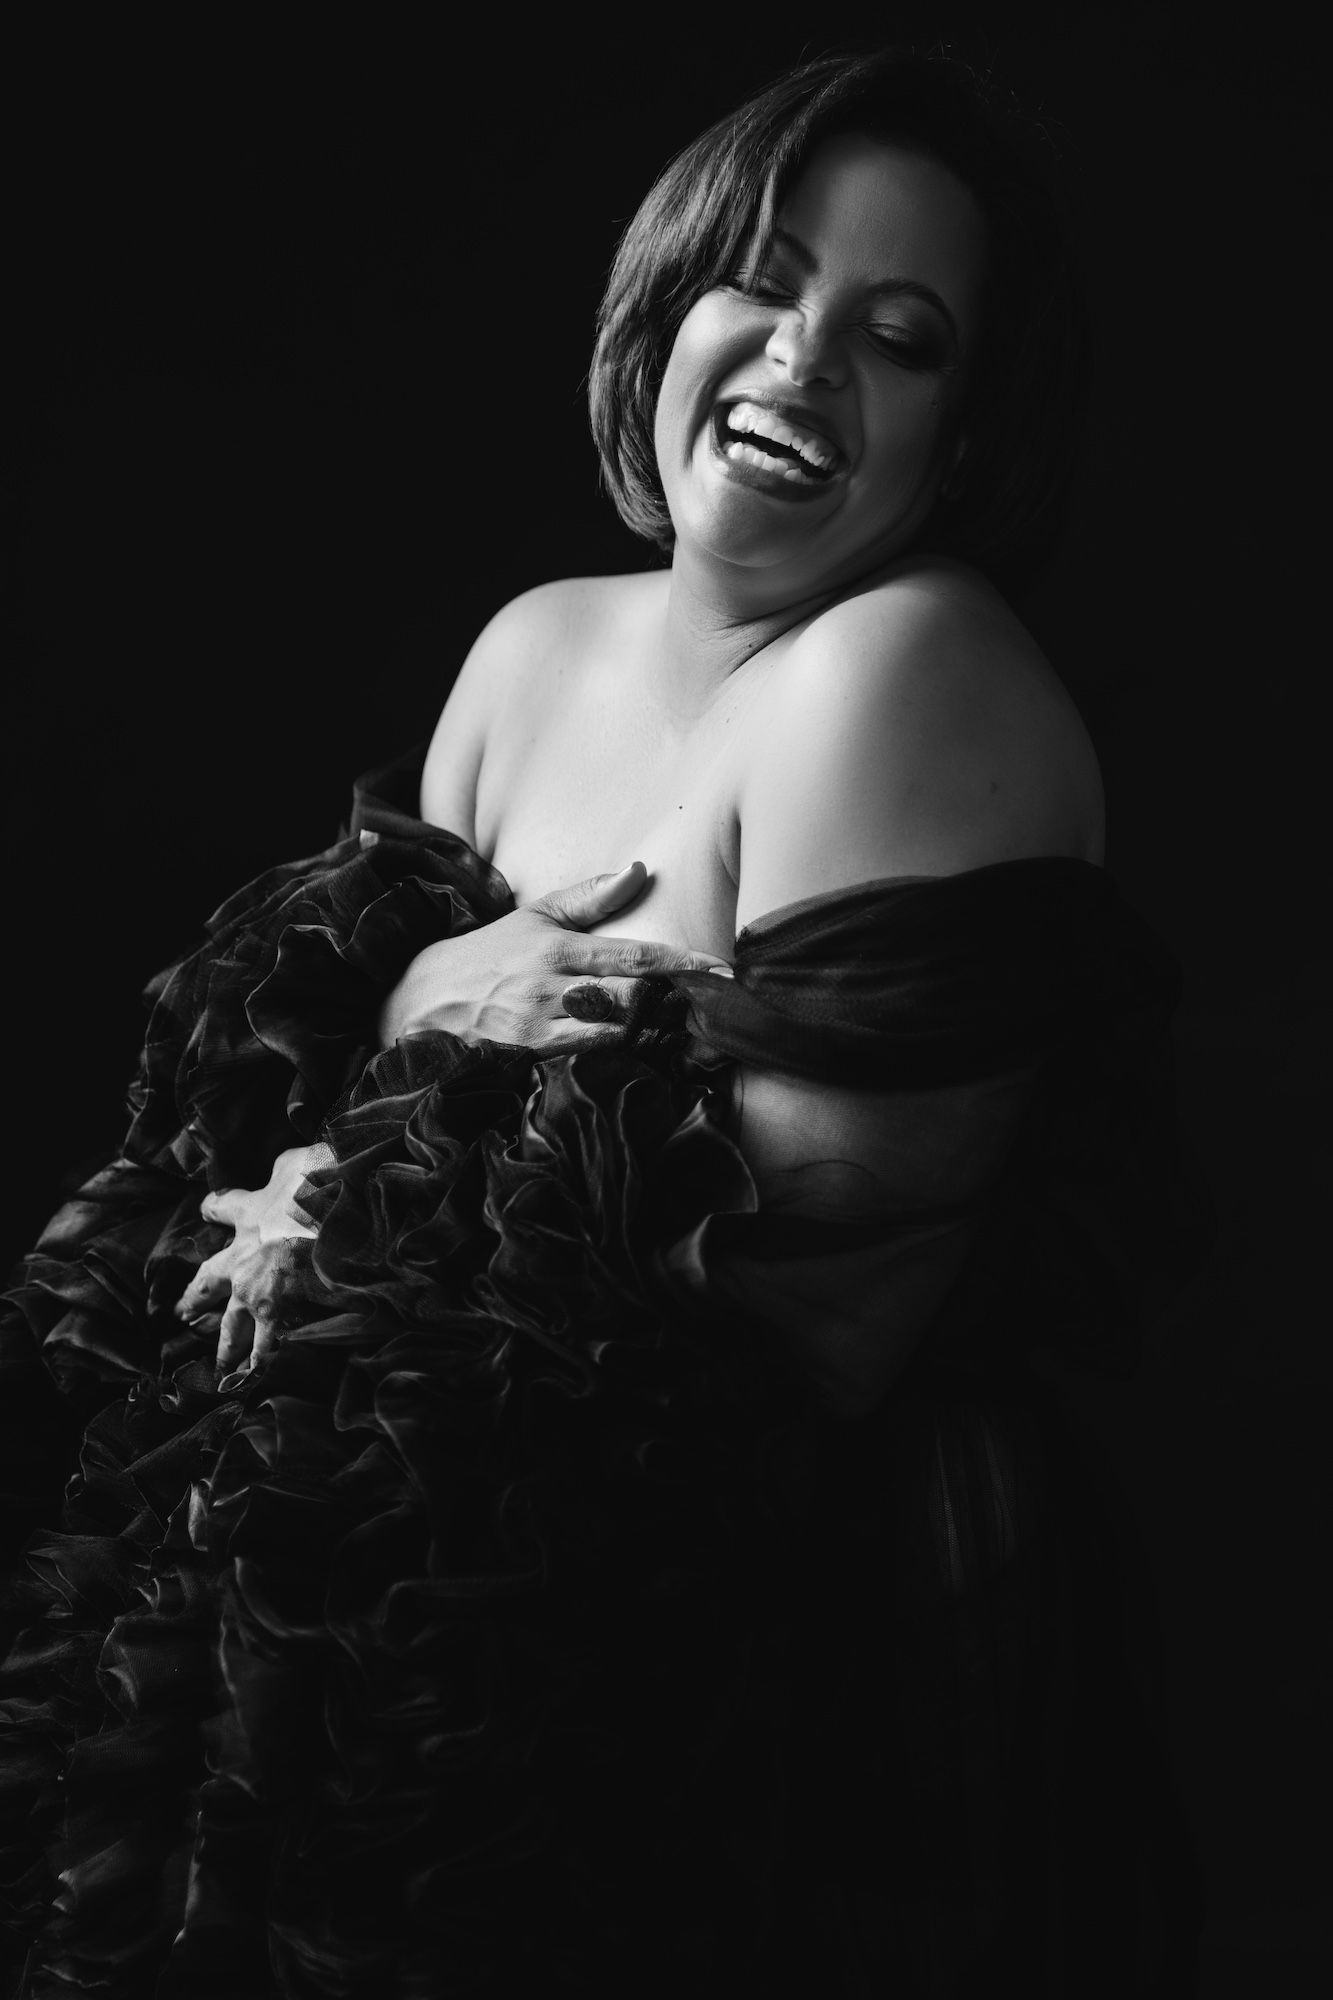 A woman in a black gown smiles, enjoying herself.